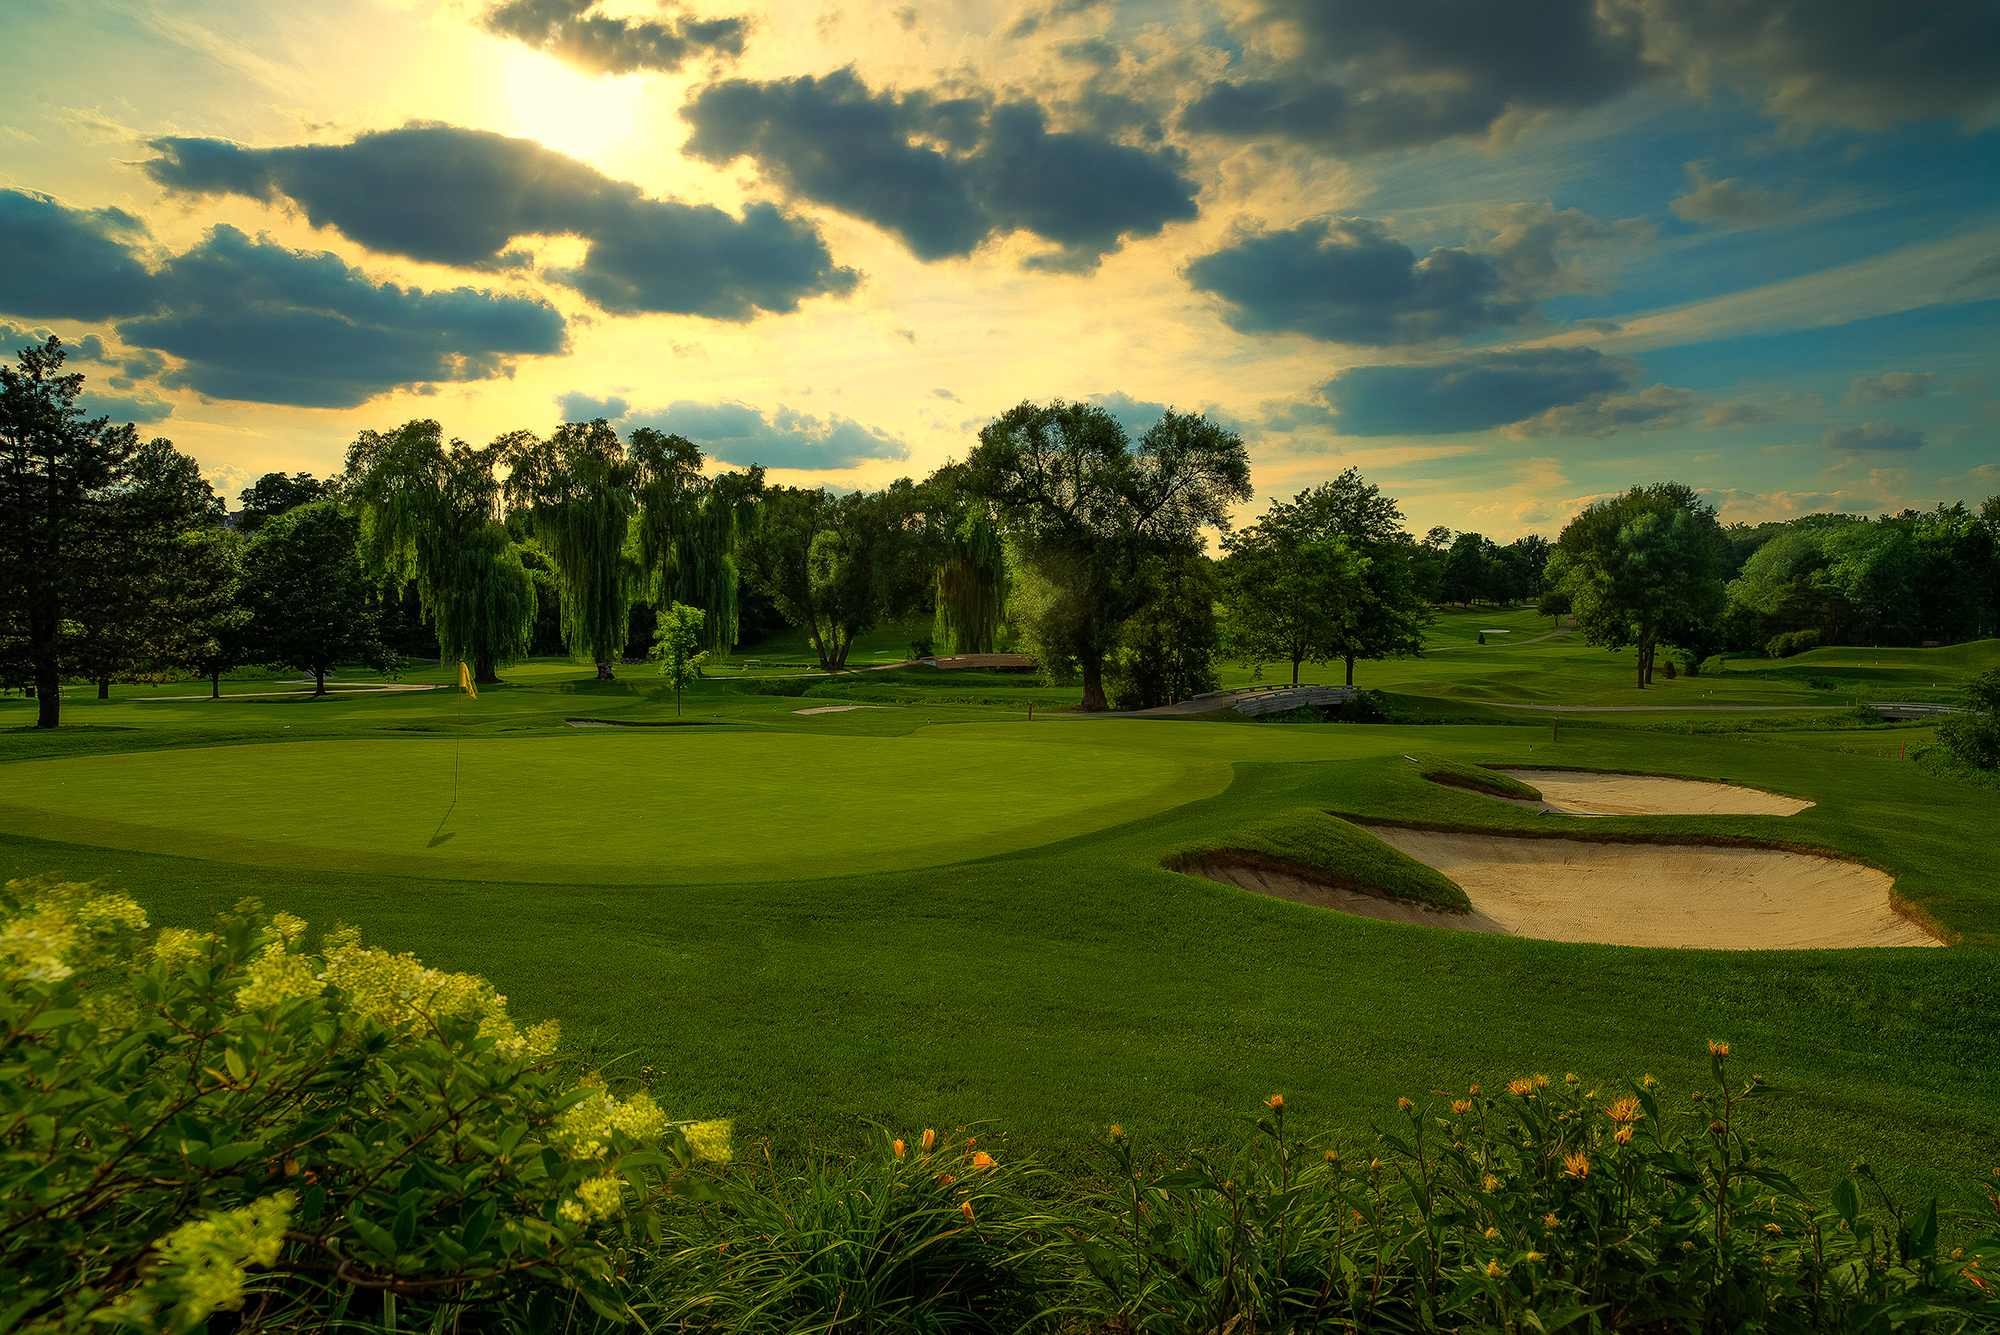 Oakdale Golf & Country Club – A centrally located oasis within one